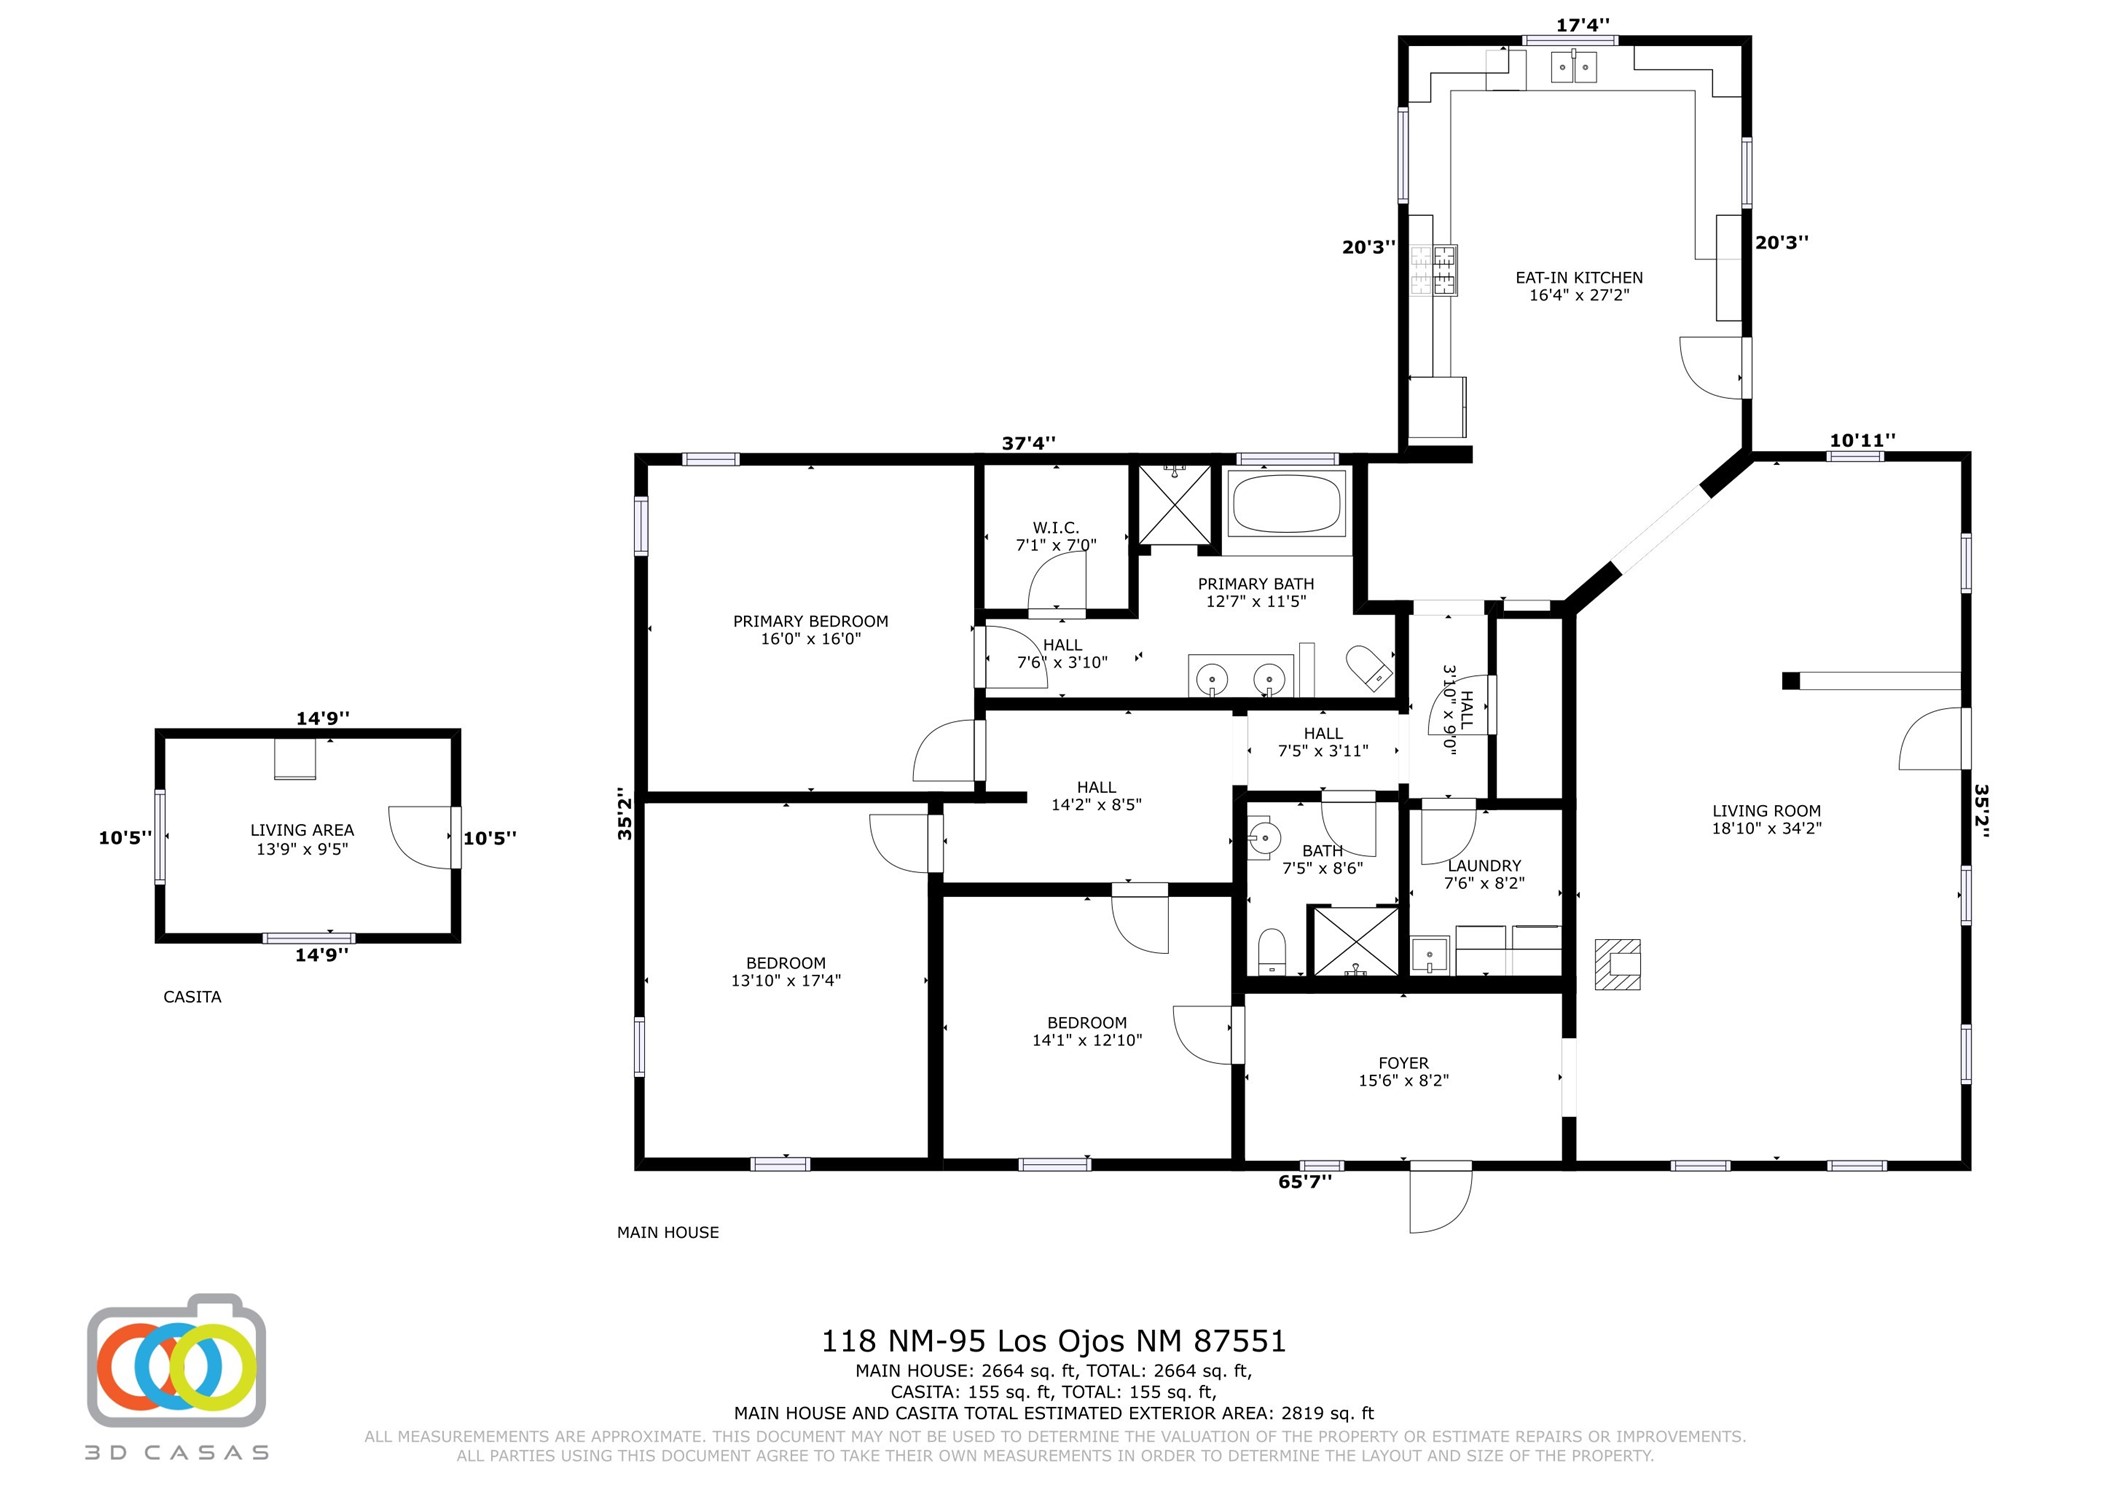 FLOOR PLAN FOR BOTH HOME (2664 SQ FT) AND CASITA (155 SQ FT)